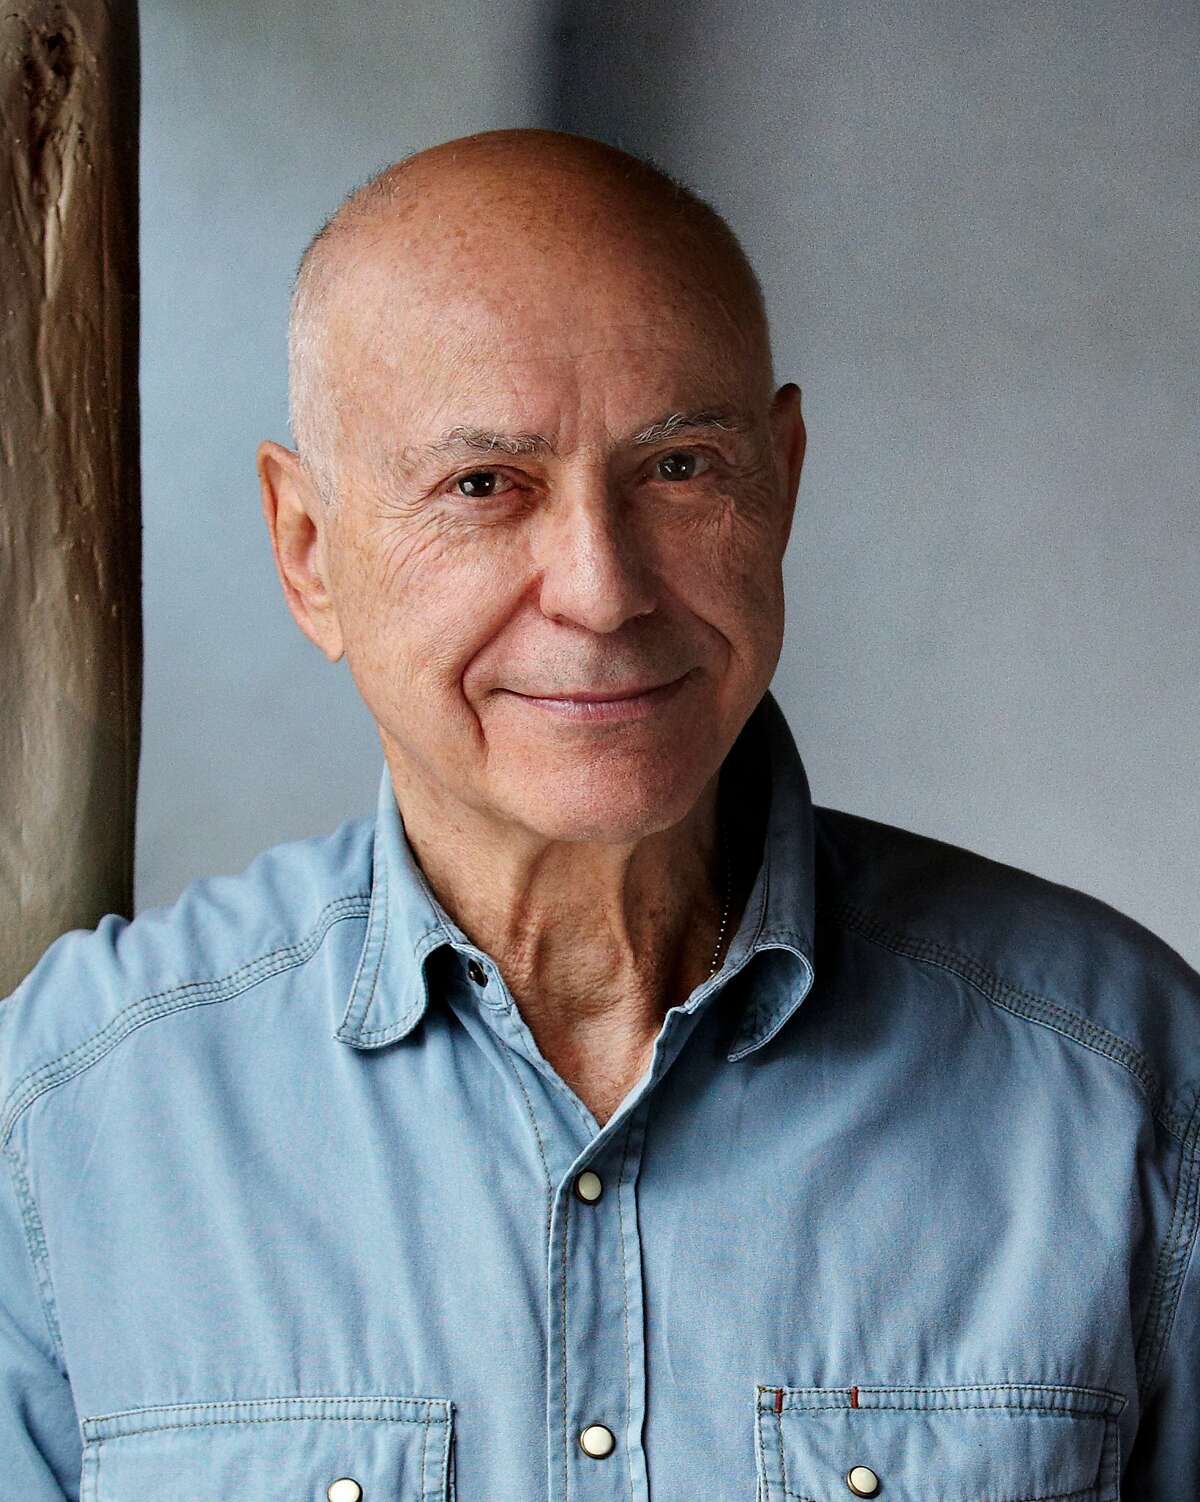 SF Sketchfest presents An Afternoon with Alan Arkin: "The Russians are Coming, The Russians are Coming" 50th Anniversary Screening and Q&A, moderated by Ron Bostwick Sunday, Jan. 10 at Castro Theatre.